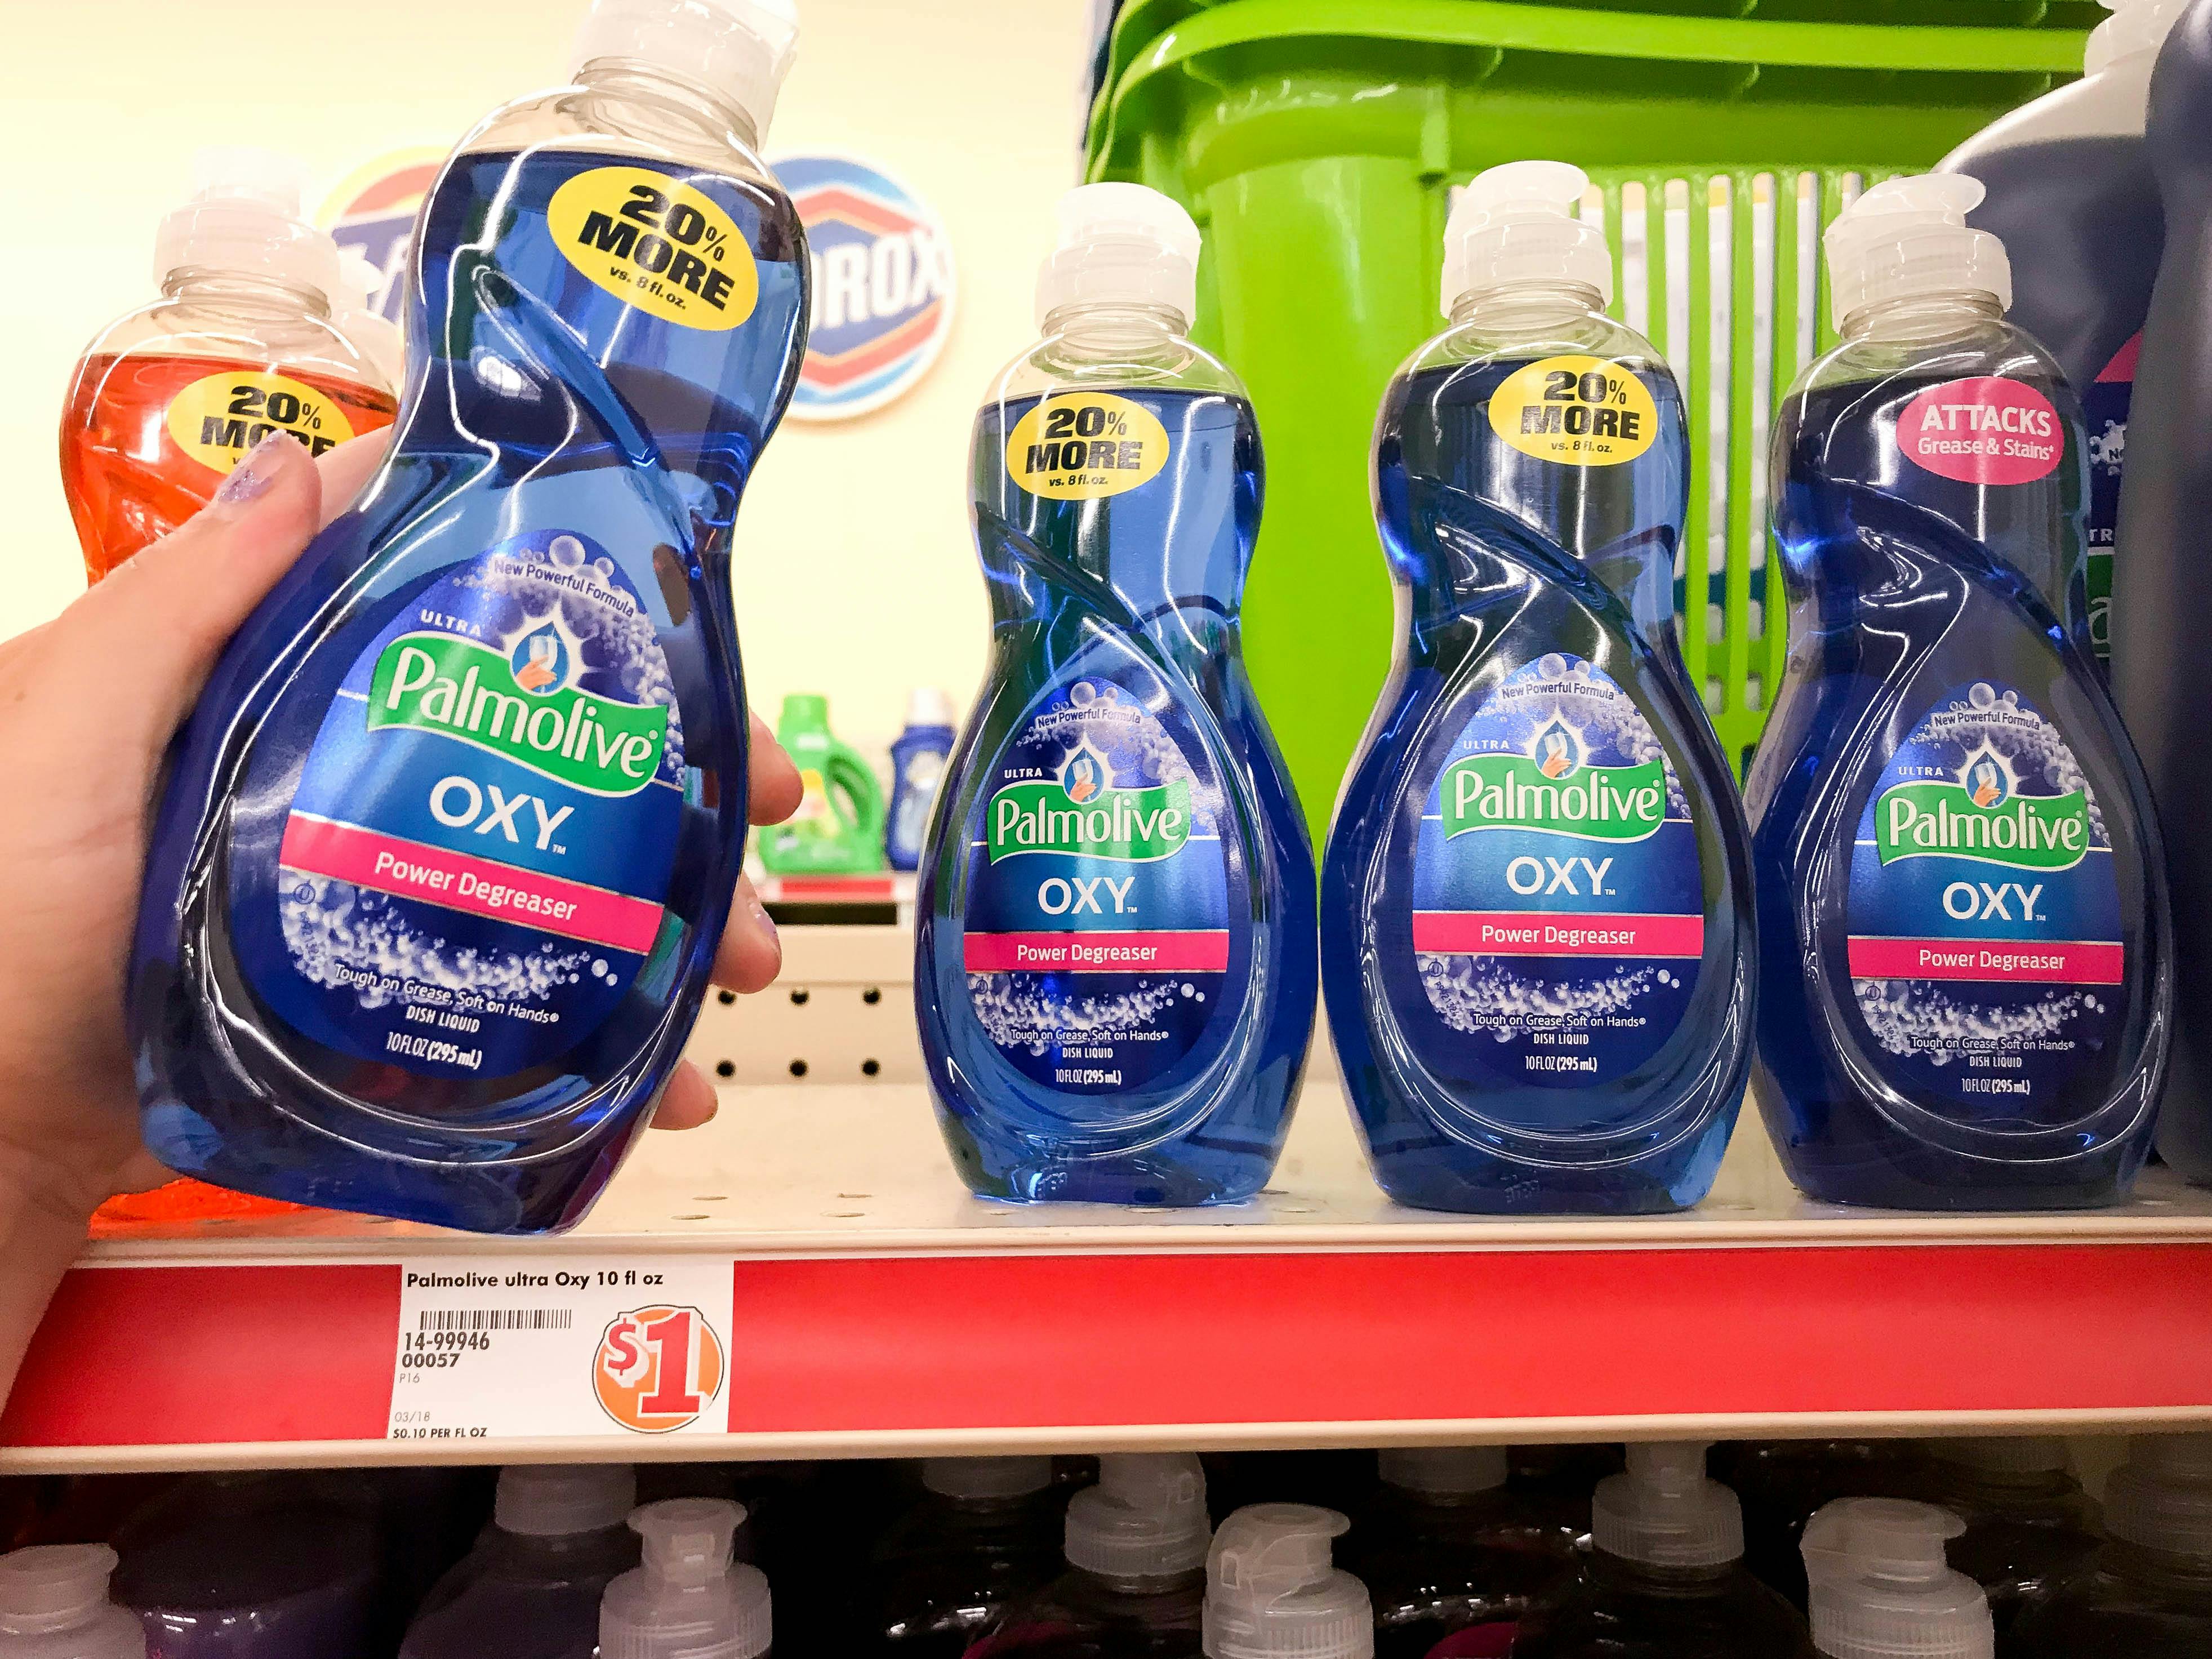 Woman pulling dish soap from a shelf with $1 price tag label